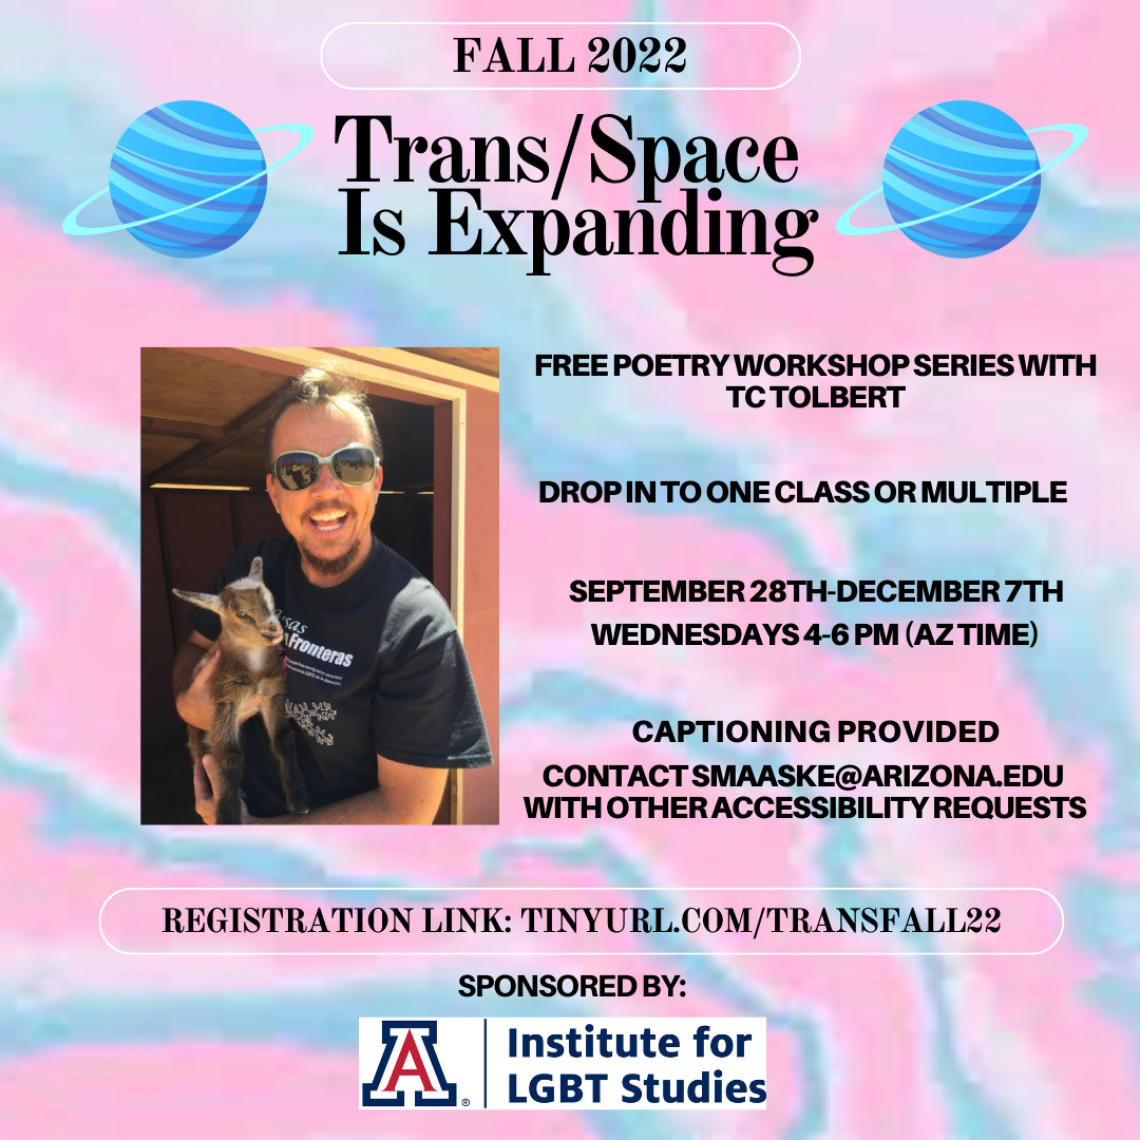 Trans flag colors on background of flyer (blue, pink, white). Two blue planets with rings at the top of flyer w/ a photo of TC Tolbert who is a white man with short brown hair holding a goat. Black text reads: Trans/Space is Expanding. Free poetry workshop series with TC Tolbert. Drop in to one class or multiple. September 28th-December 7th. Wednesdays 4-6pm (AZ Time). Captioning provided. Contact smaaske@arizona.edu with accessibility needs. Registration link: tinyurl.com/TransFall22